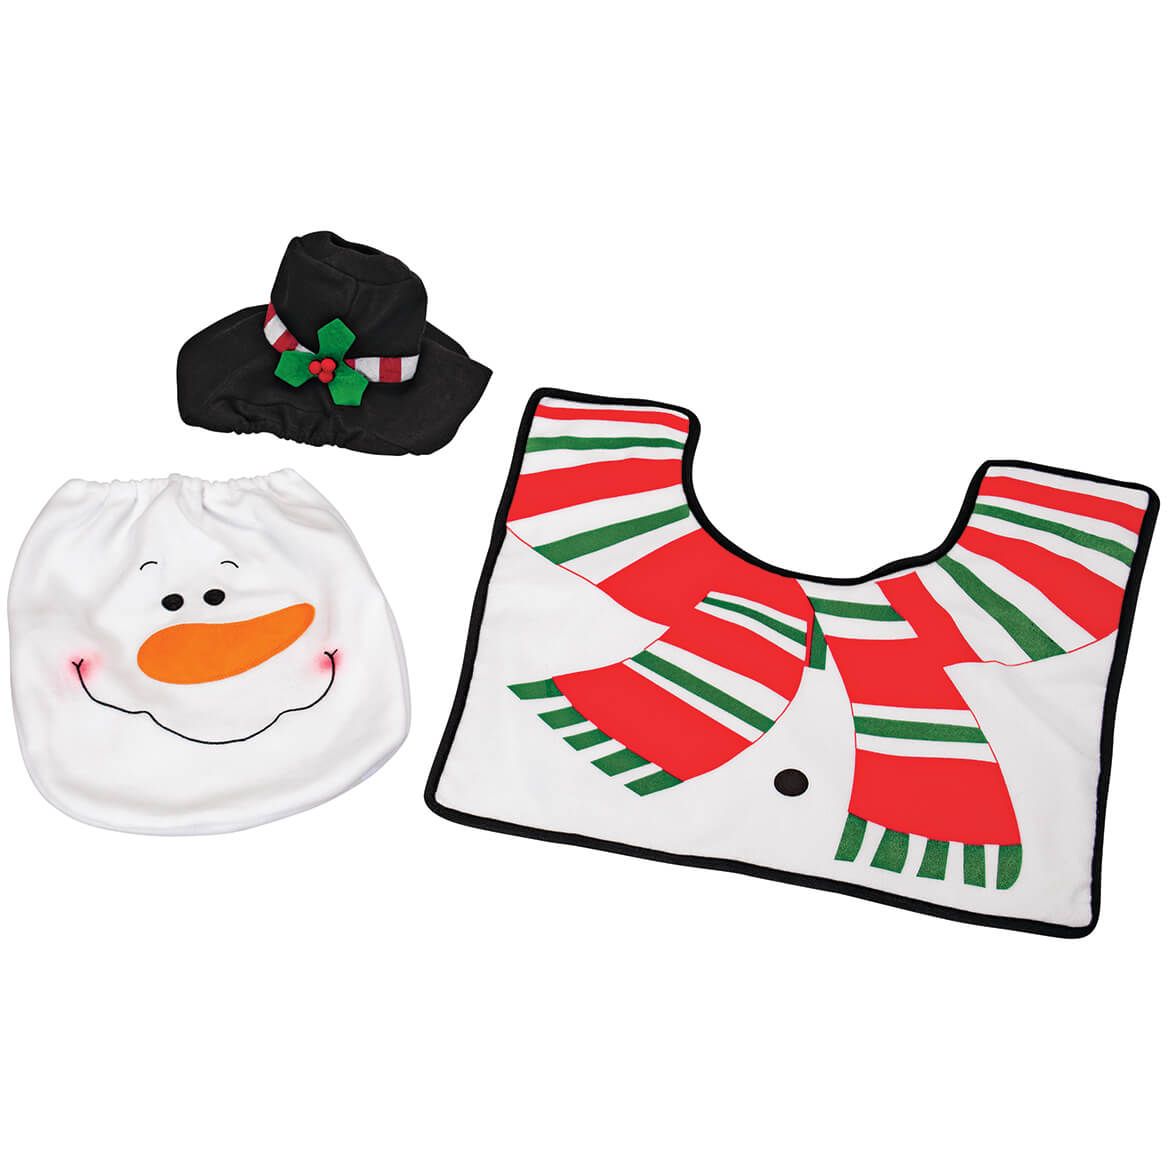 Snowman Toilet Cover and Rug, Set of 3 + '-' + 372336